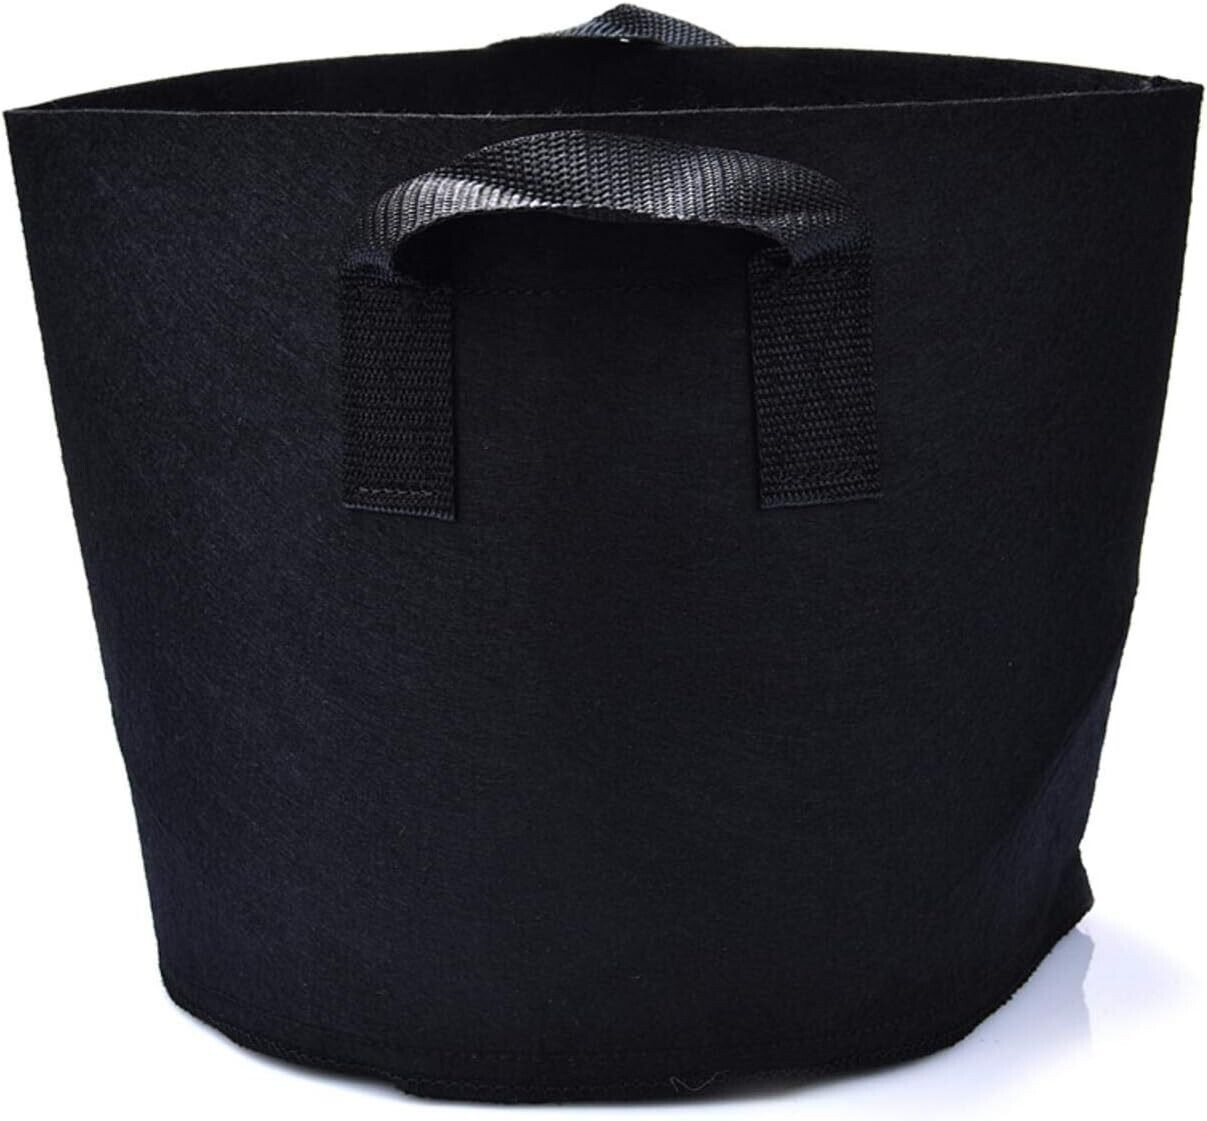 Planting Bag/Grow Bag Fabric Pots Nursery Bags with Handles Plant Seeding Bags Container - 5 Gallon Capacity